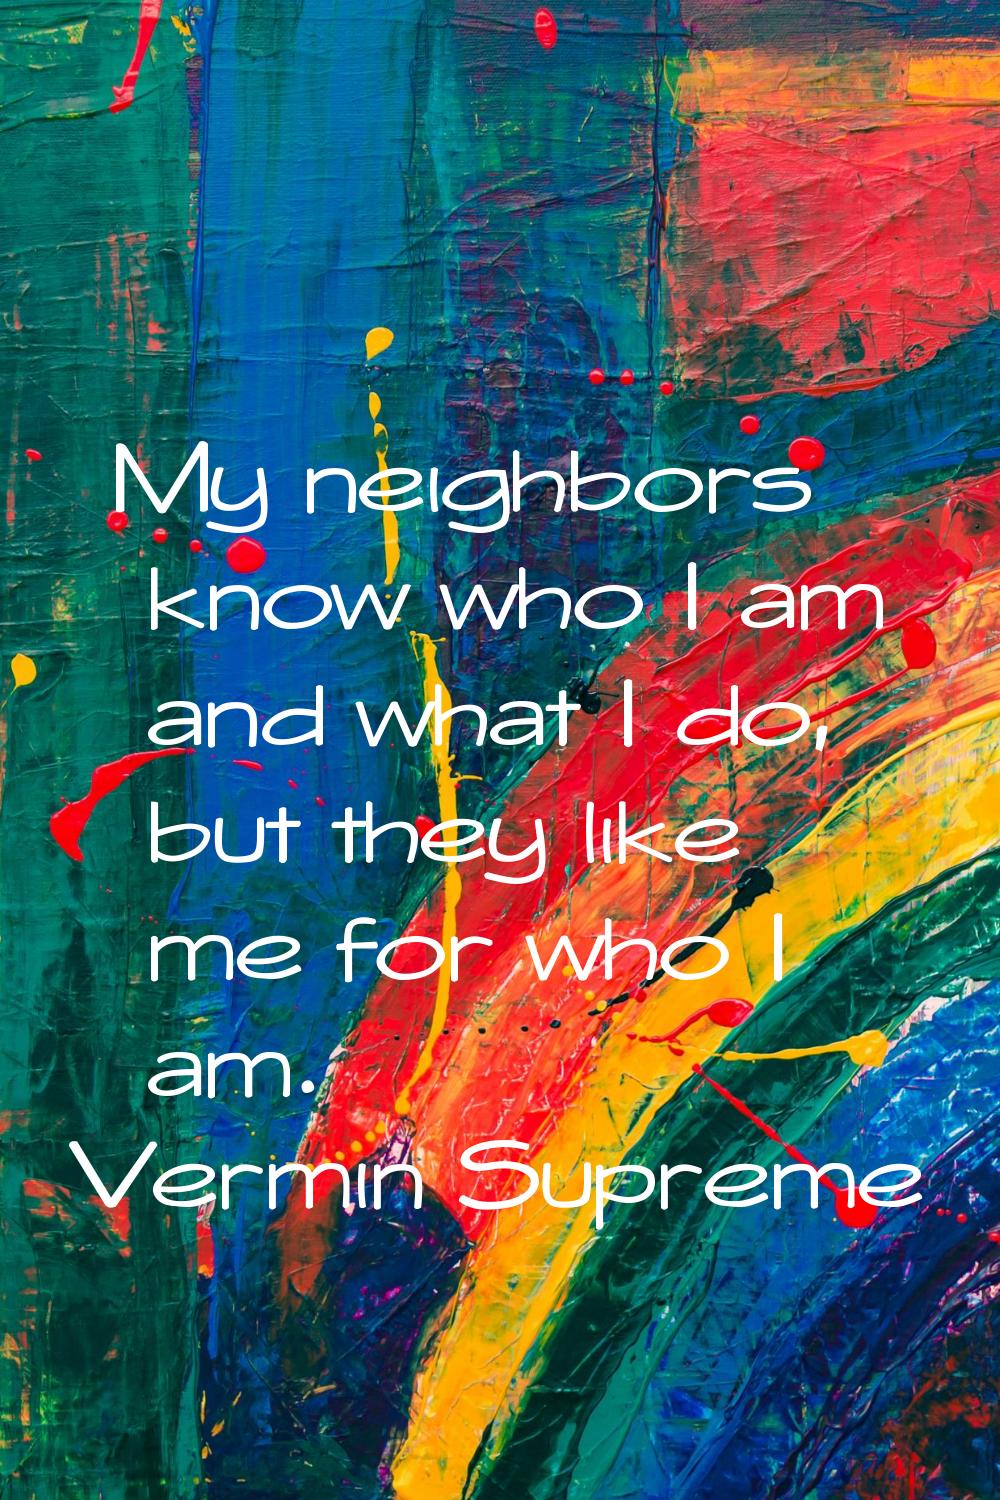 My neighbors know who I am and what I do, but they like me for who I am.